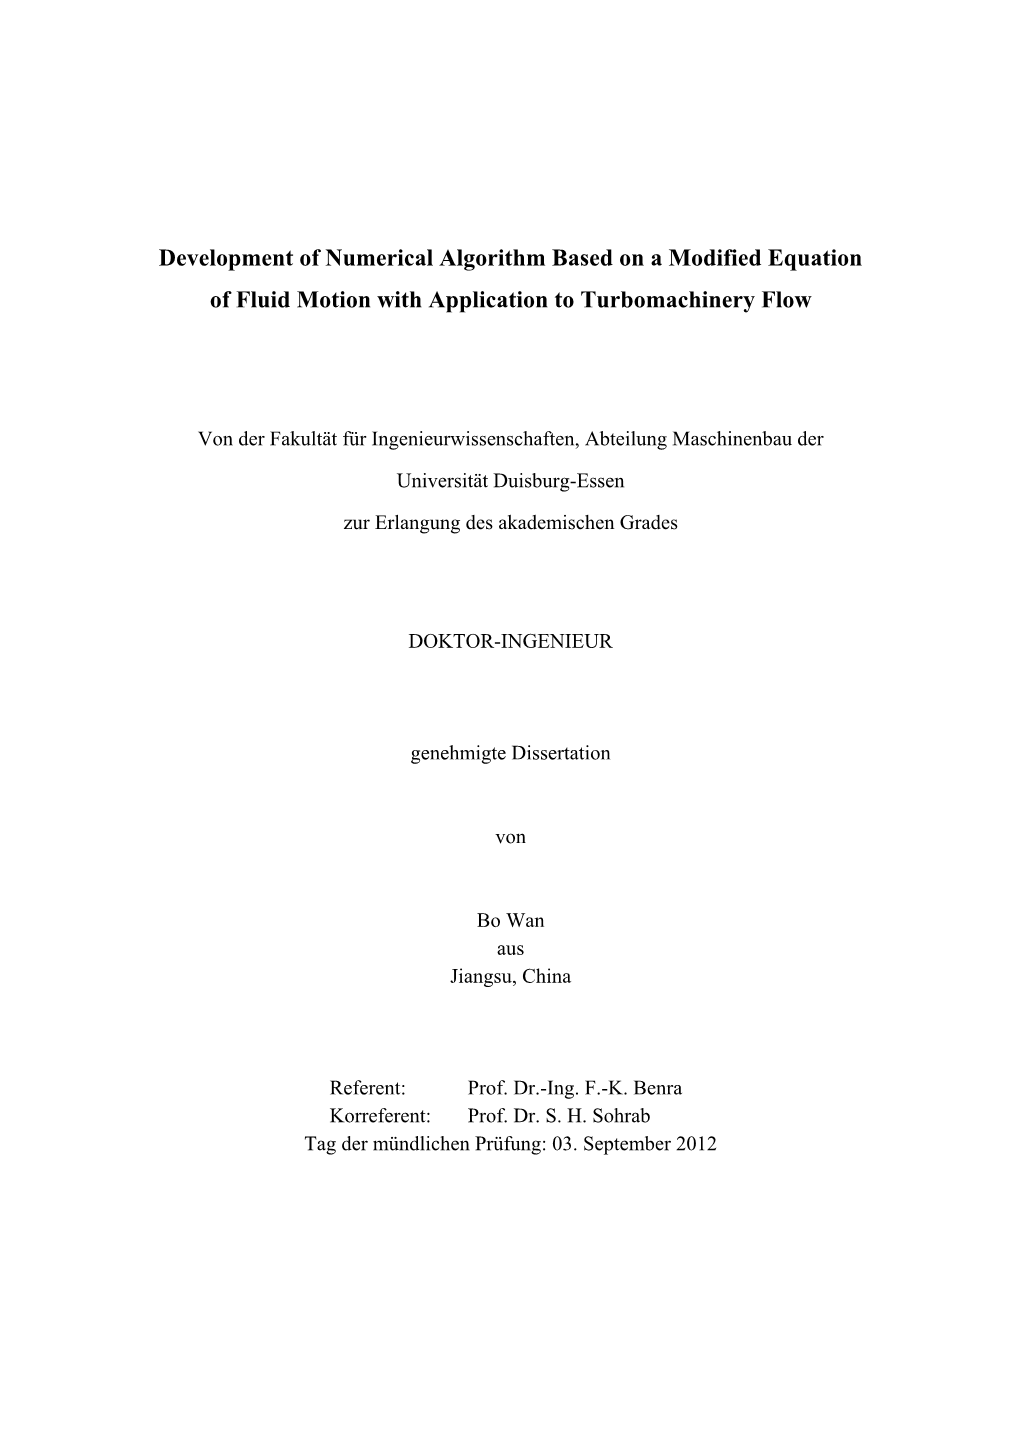 Development of Numerical Algorithm Based on a Modified Equation of Fluid Motion with Application to Turbomachinery Flow